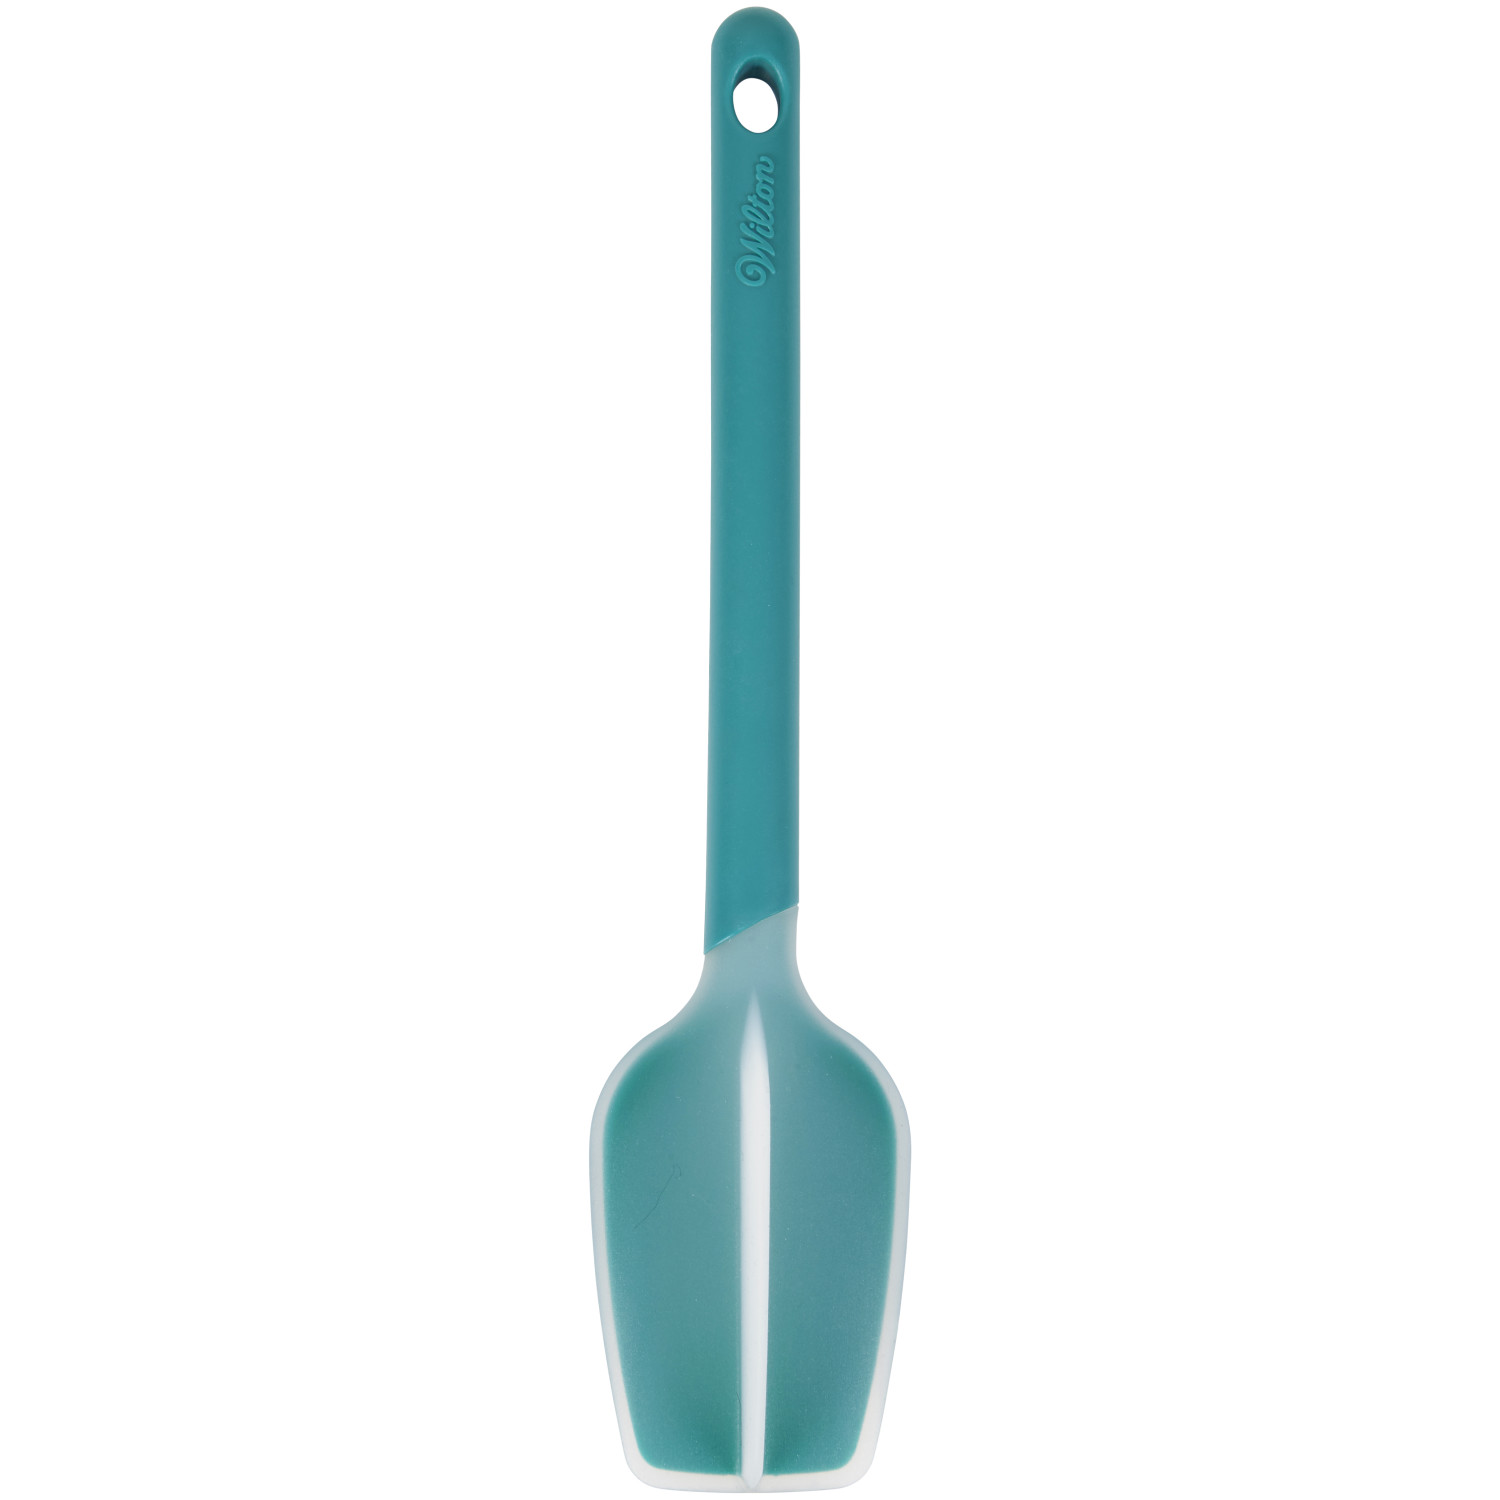 Versa-Tools Measure and Scrape Spatula Set for Cooking and Baking